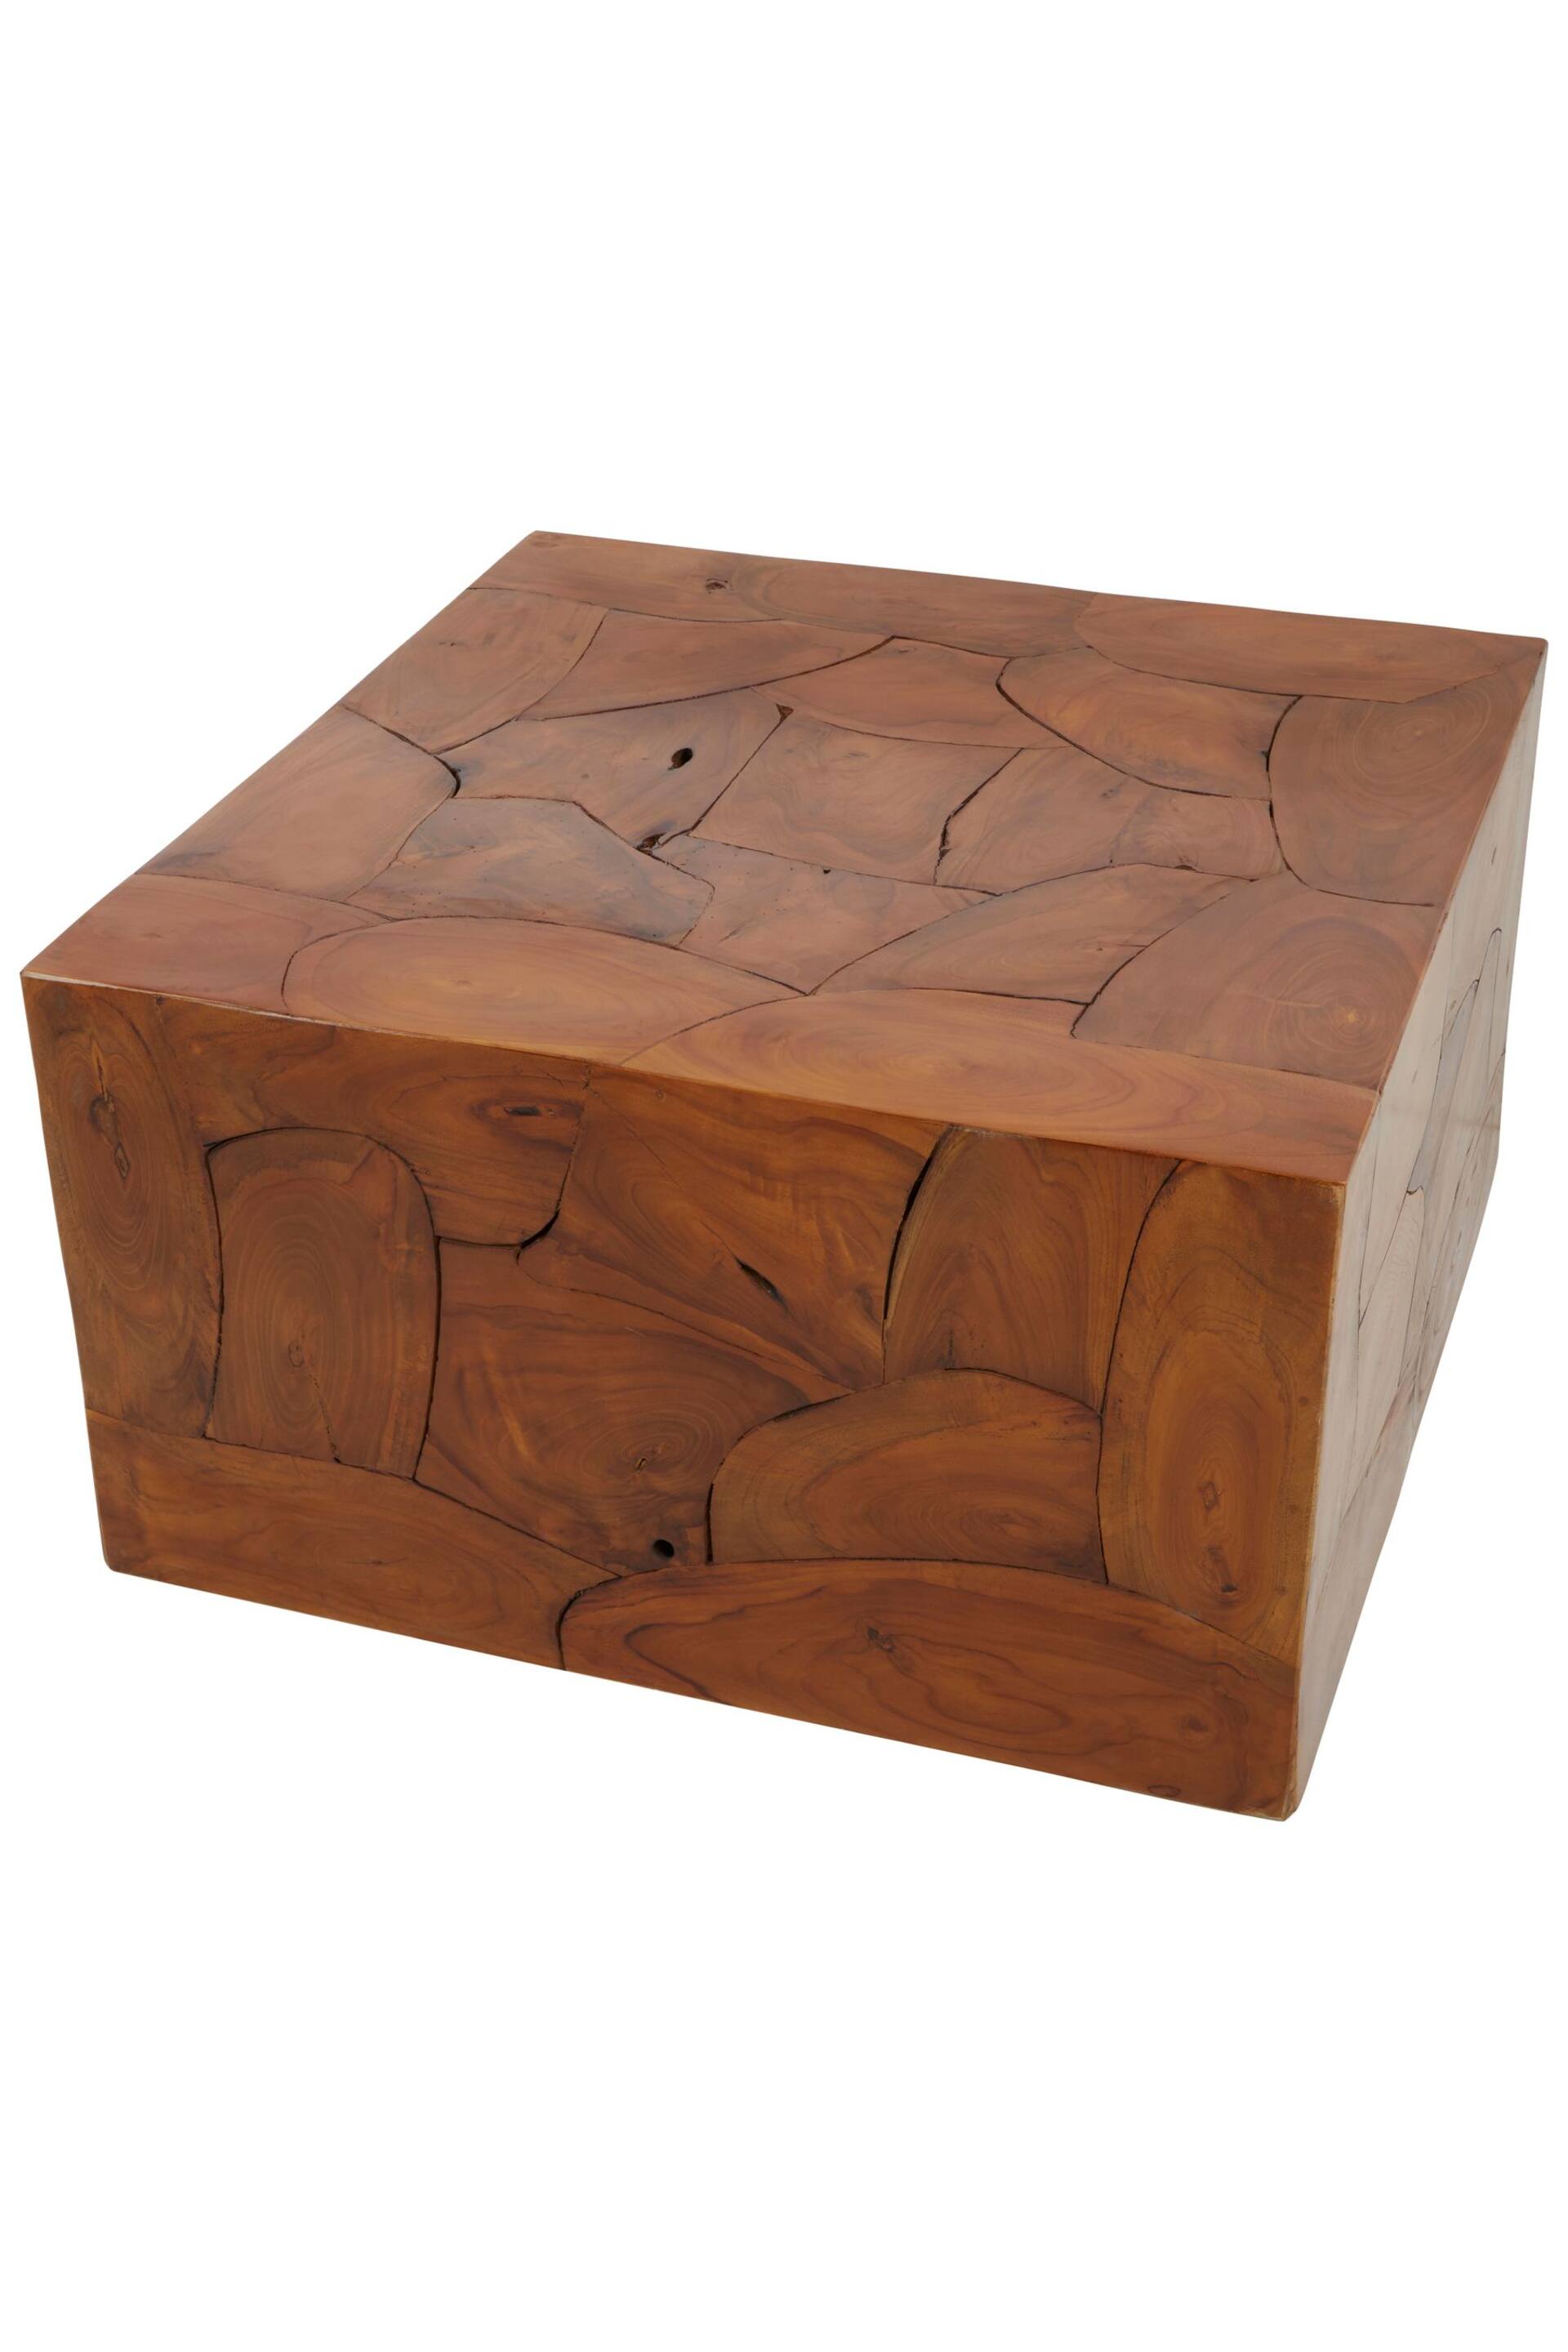 Fifty Five South Brown Surak Teak Wood Coffee Table - Image 5 of 6